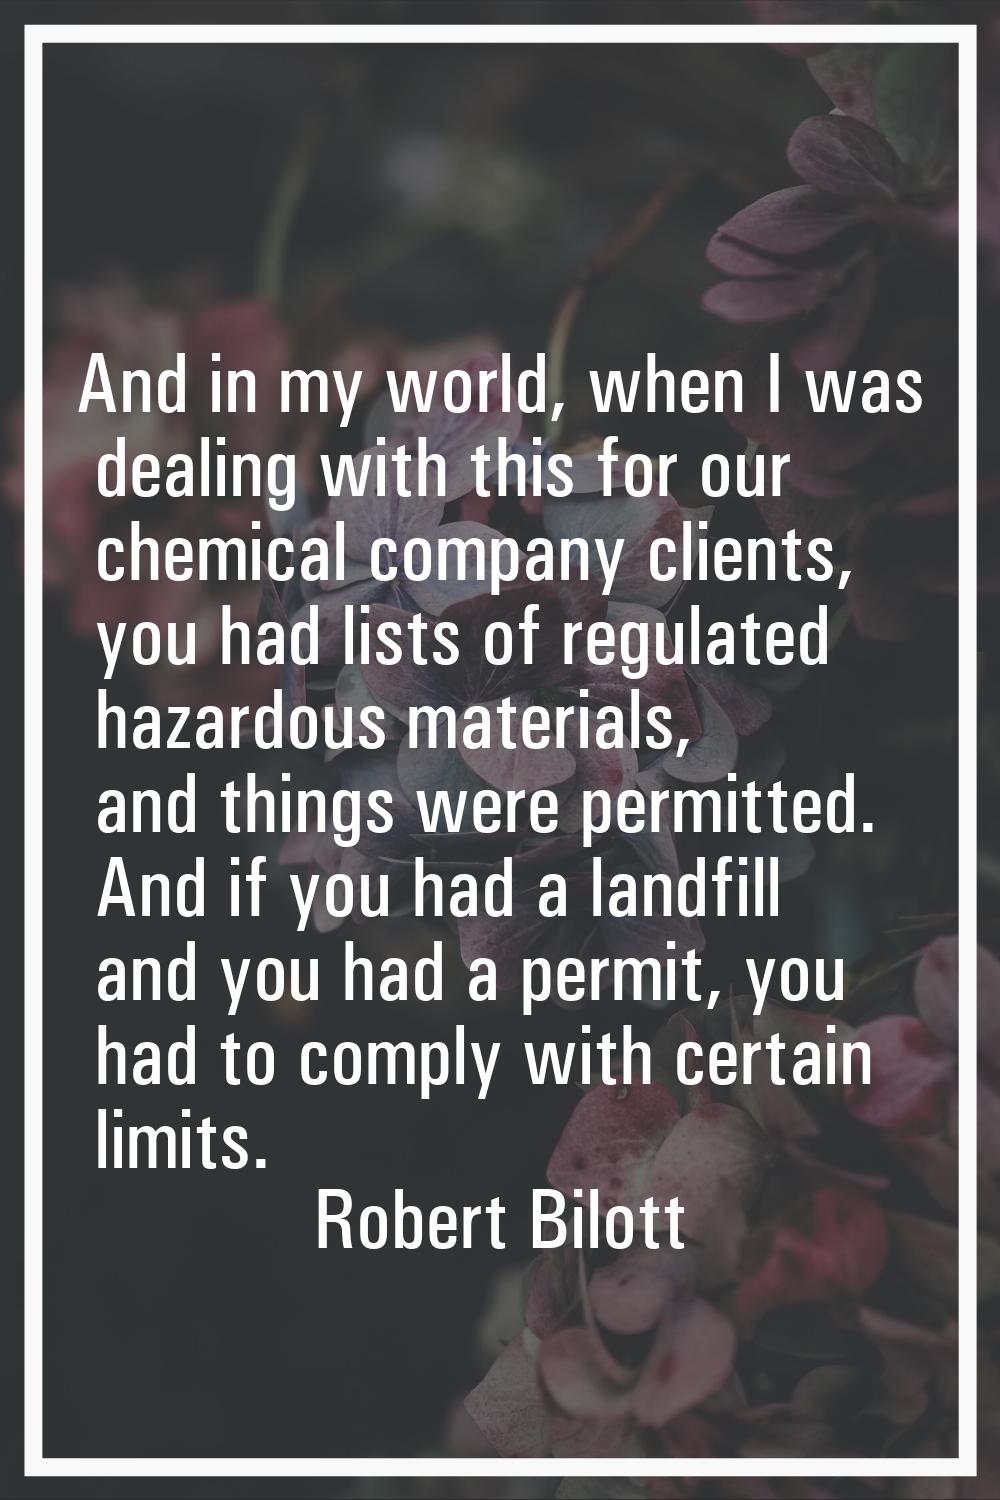 And in my world, when I was dealing with this for our chemical company clients, you had lists of re